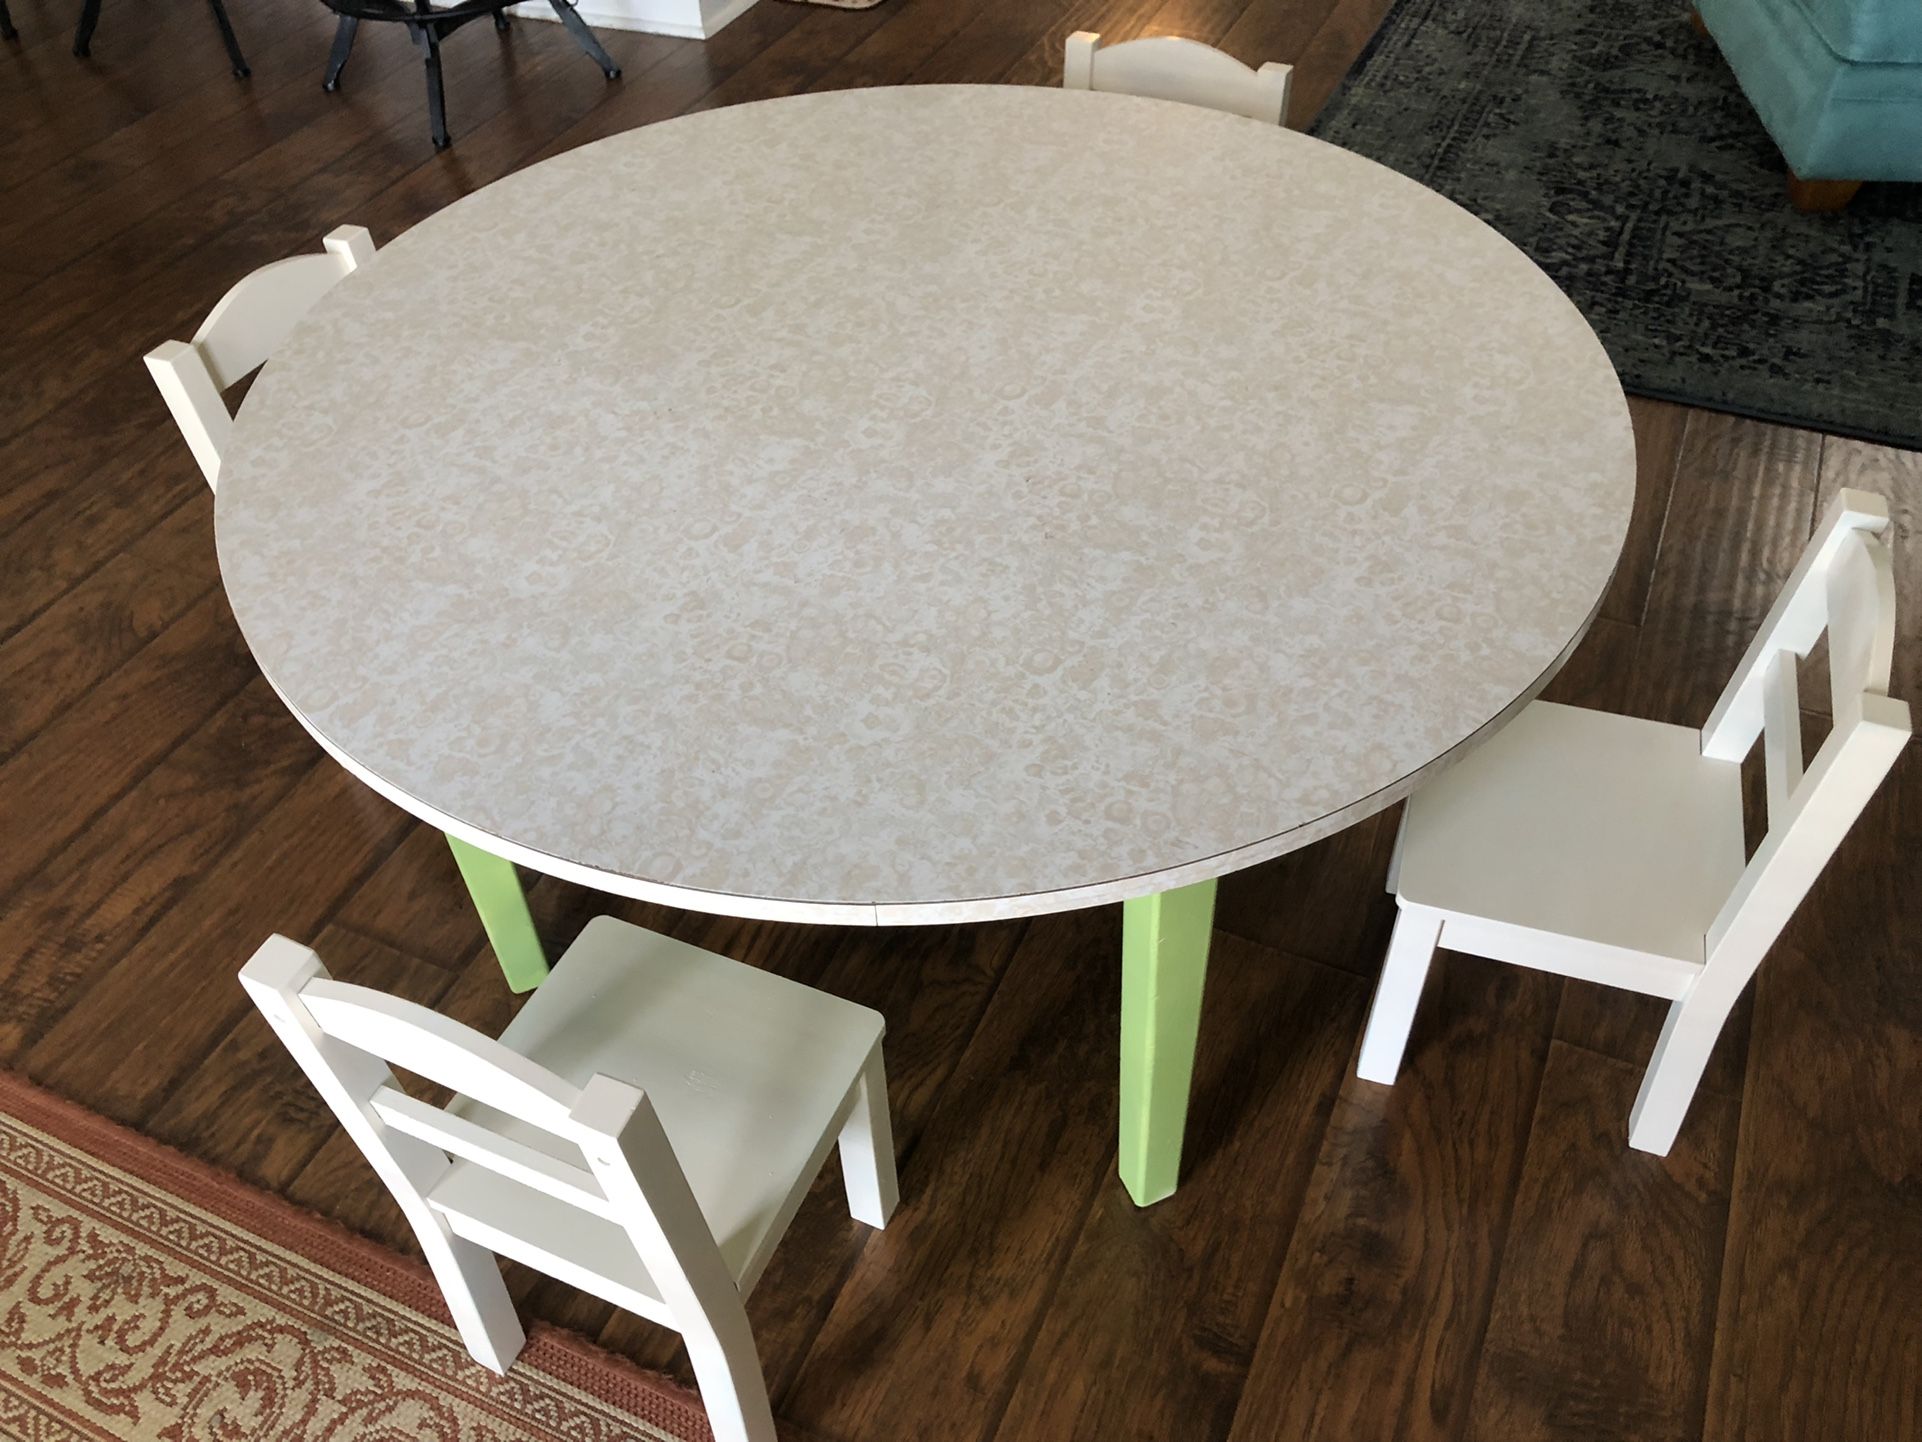 Retro Kids Table & Chairs